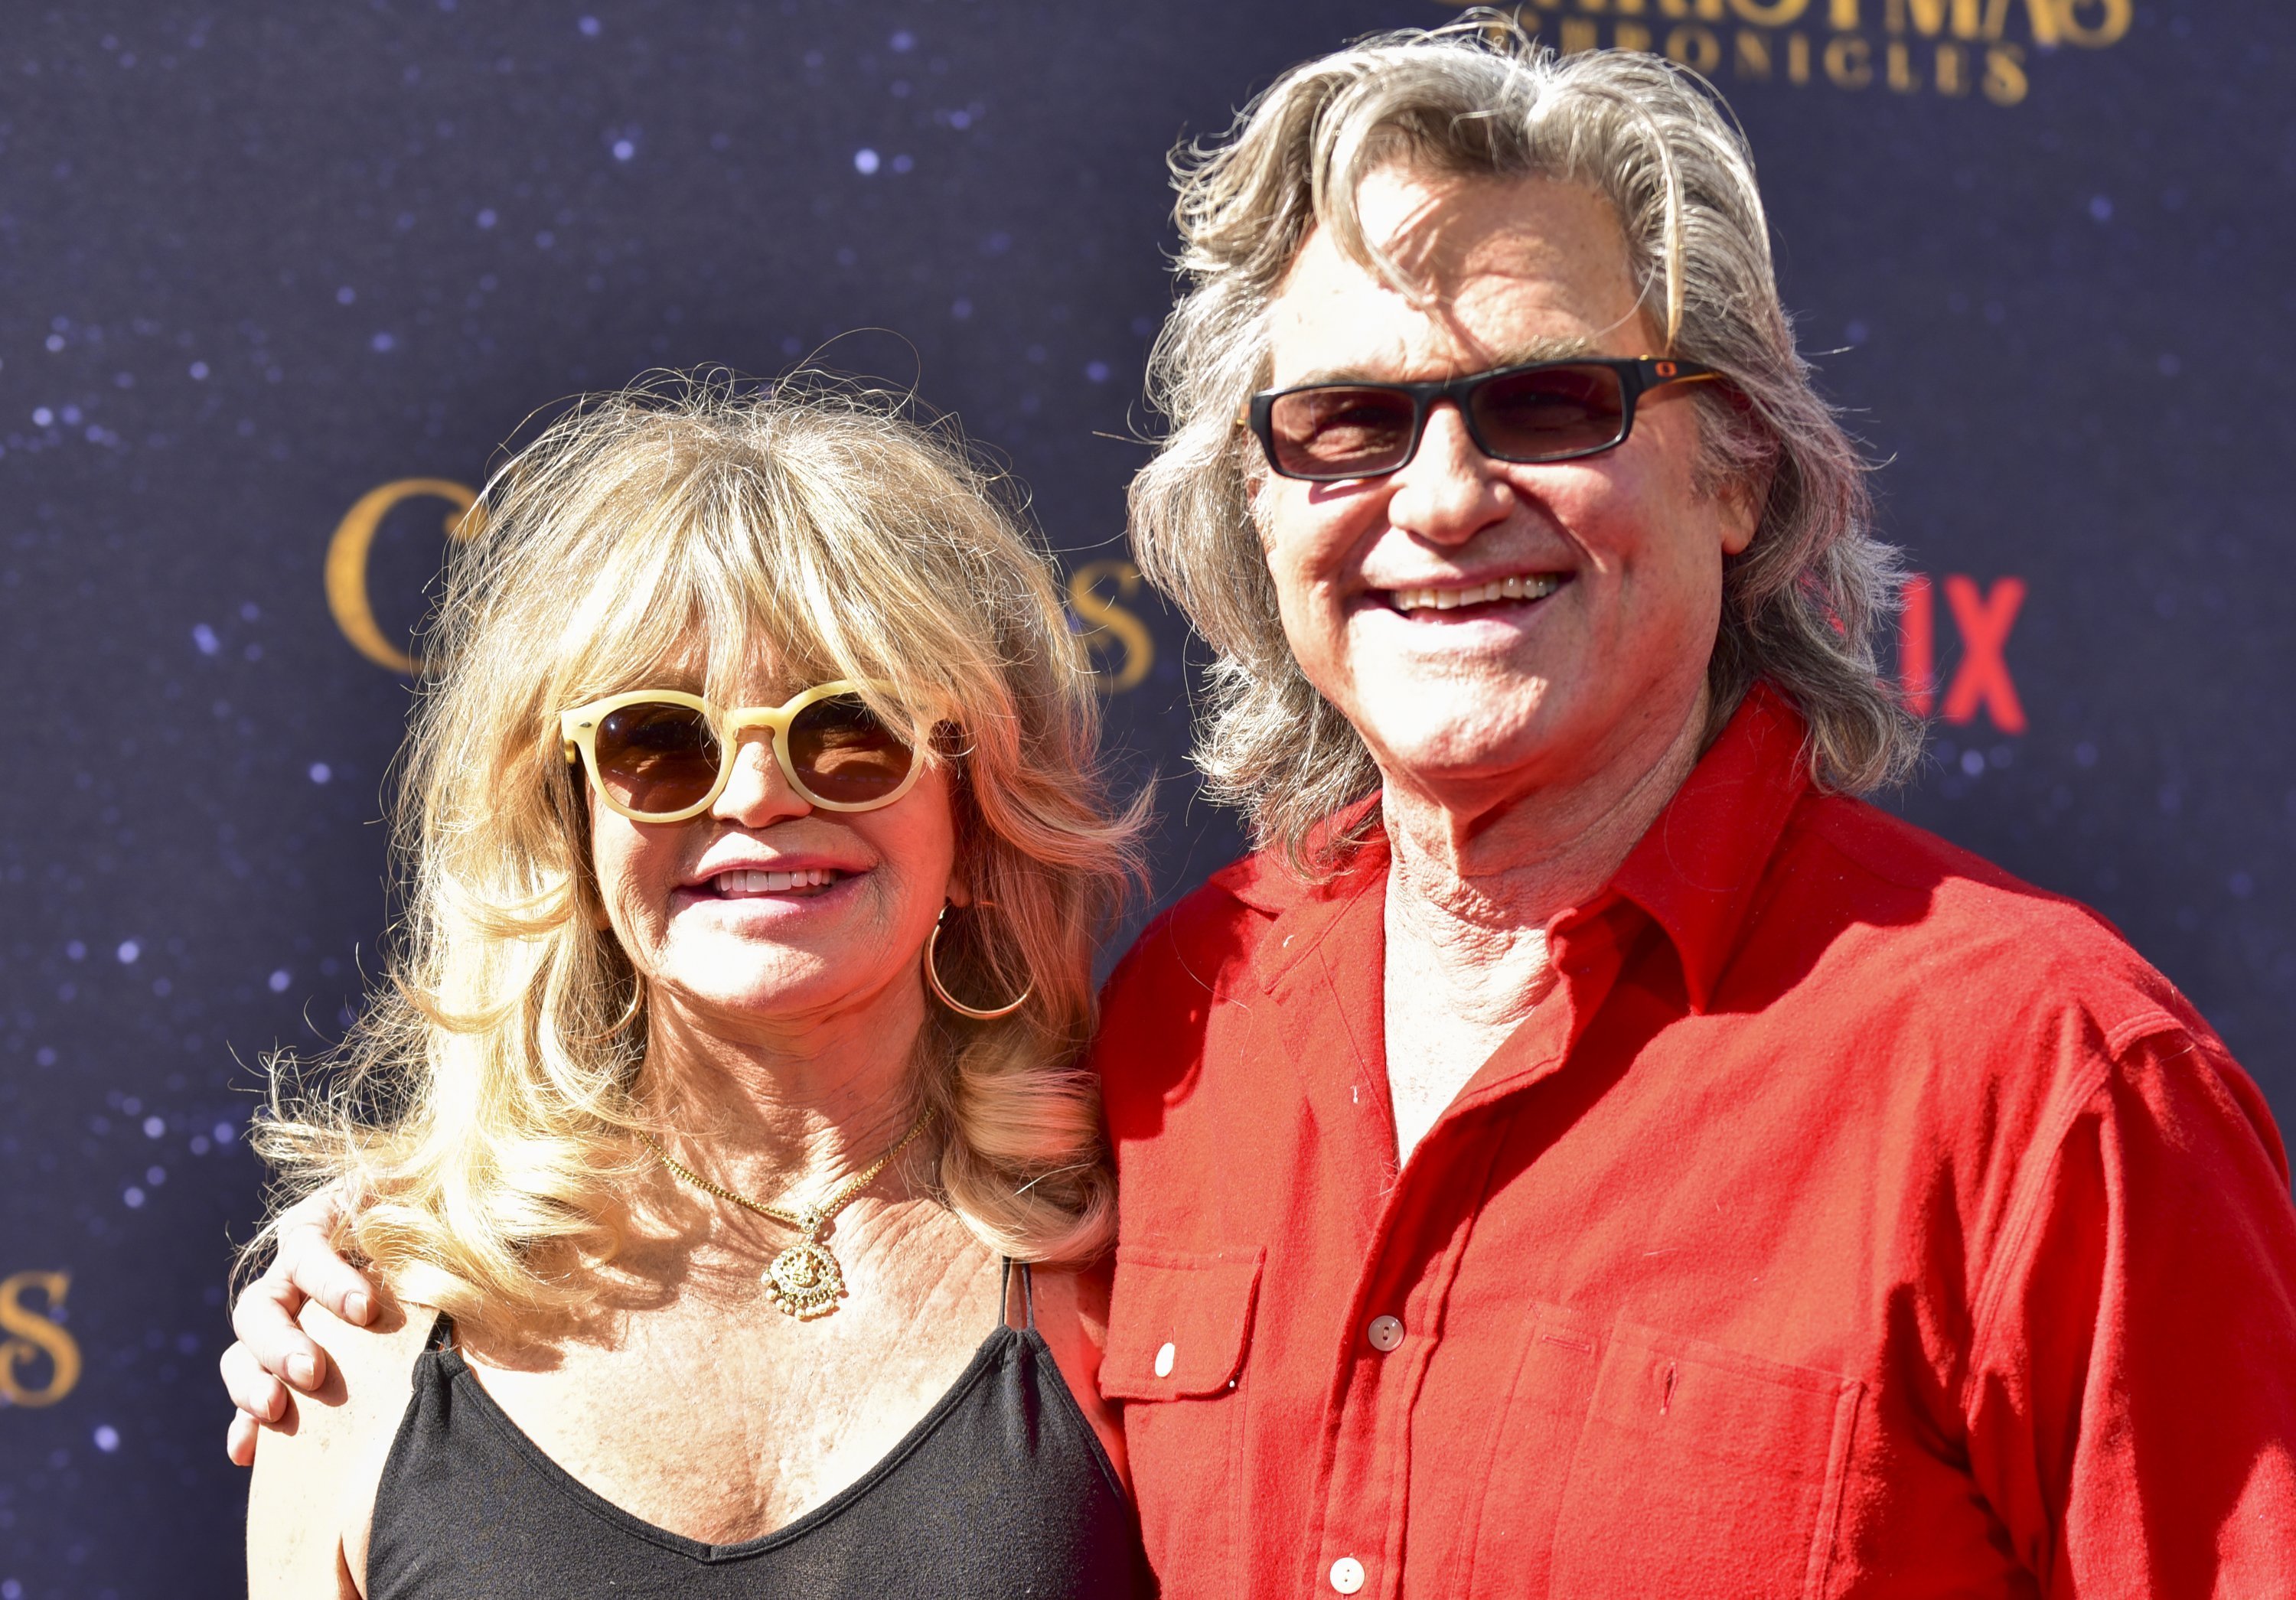 Goldie Hawn and Kurt Russell at the premiere of their Netflix film "The Christmas Chronicles" in November 2018 | Photo: Getty Images